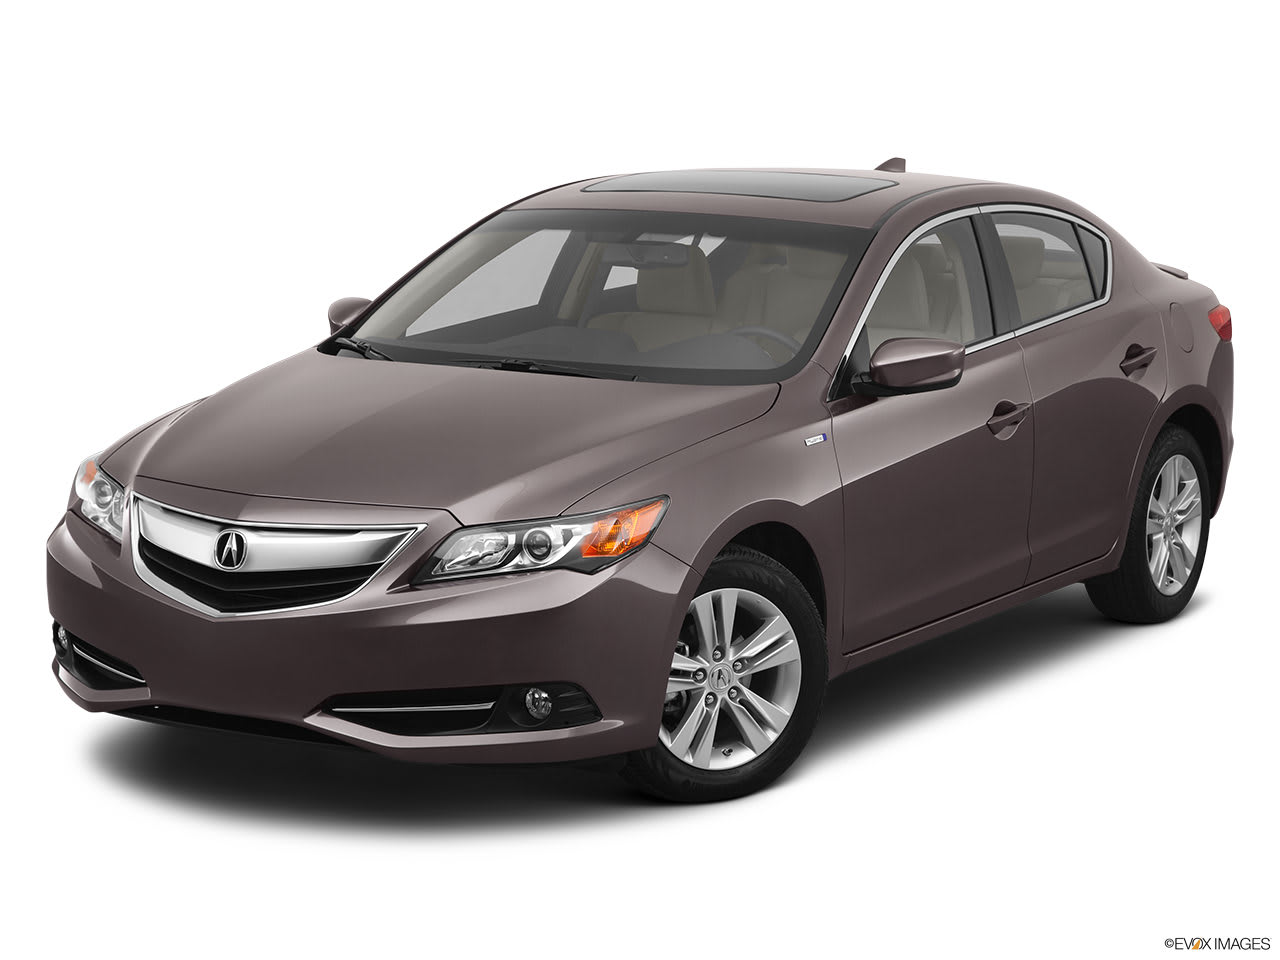 A Buyer's Guide to the 2013 Acura ILX Hybrid | YourMechanic Advice